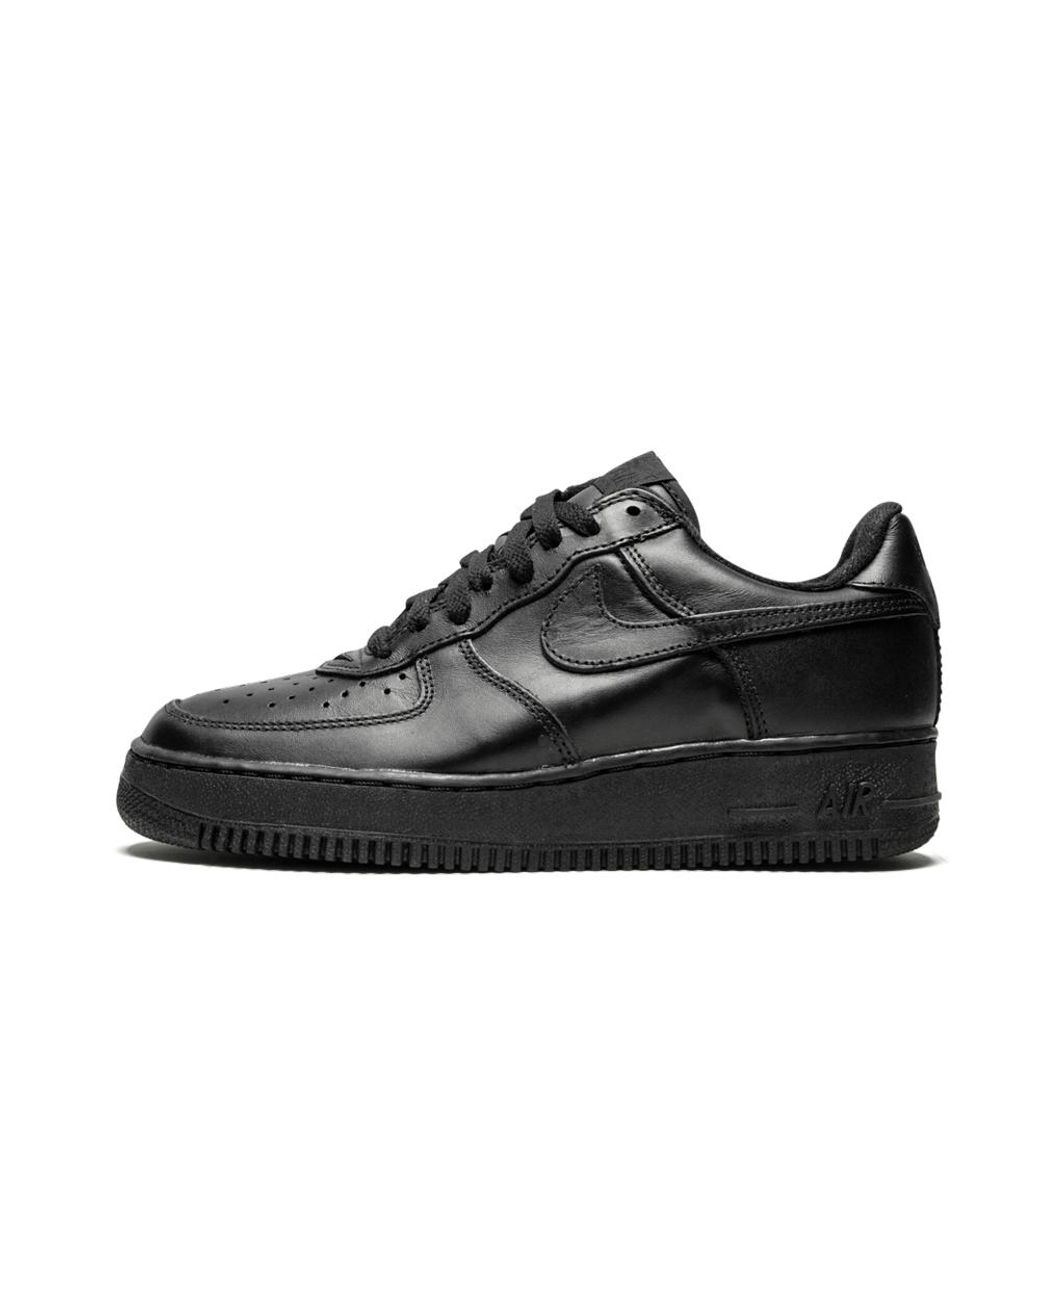 air force 1 size 6.5 black